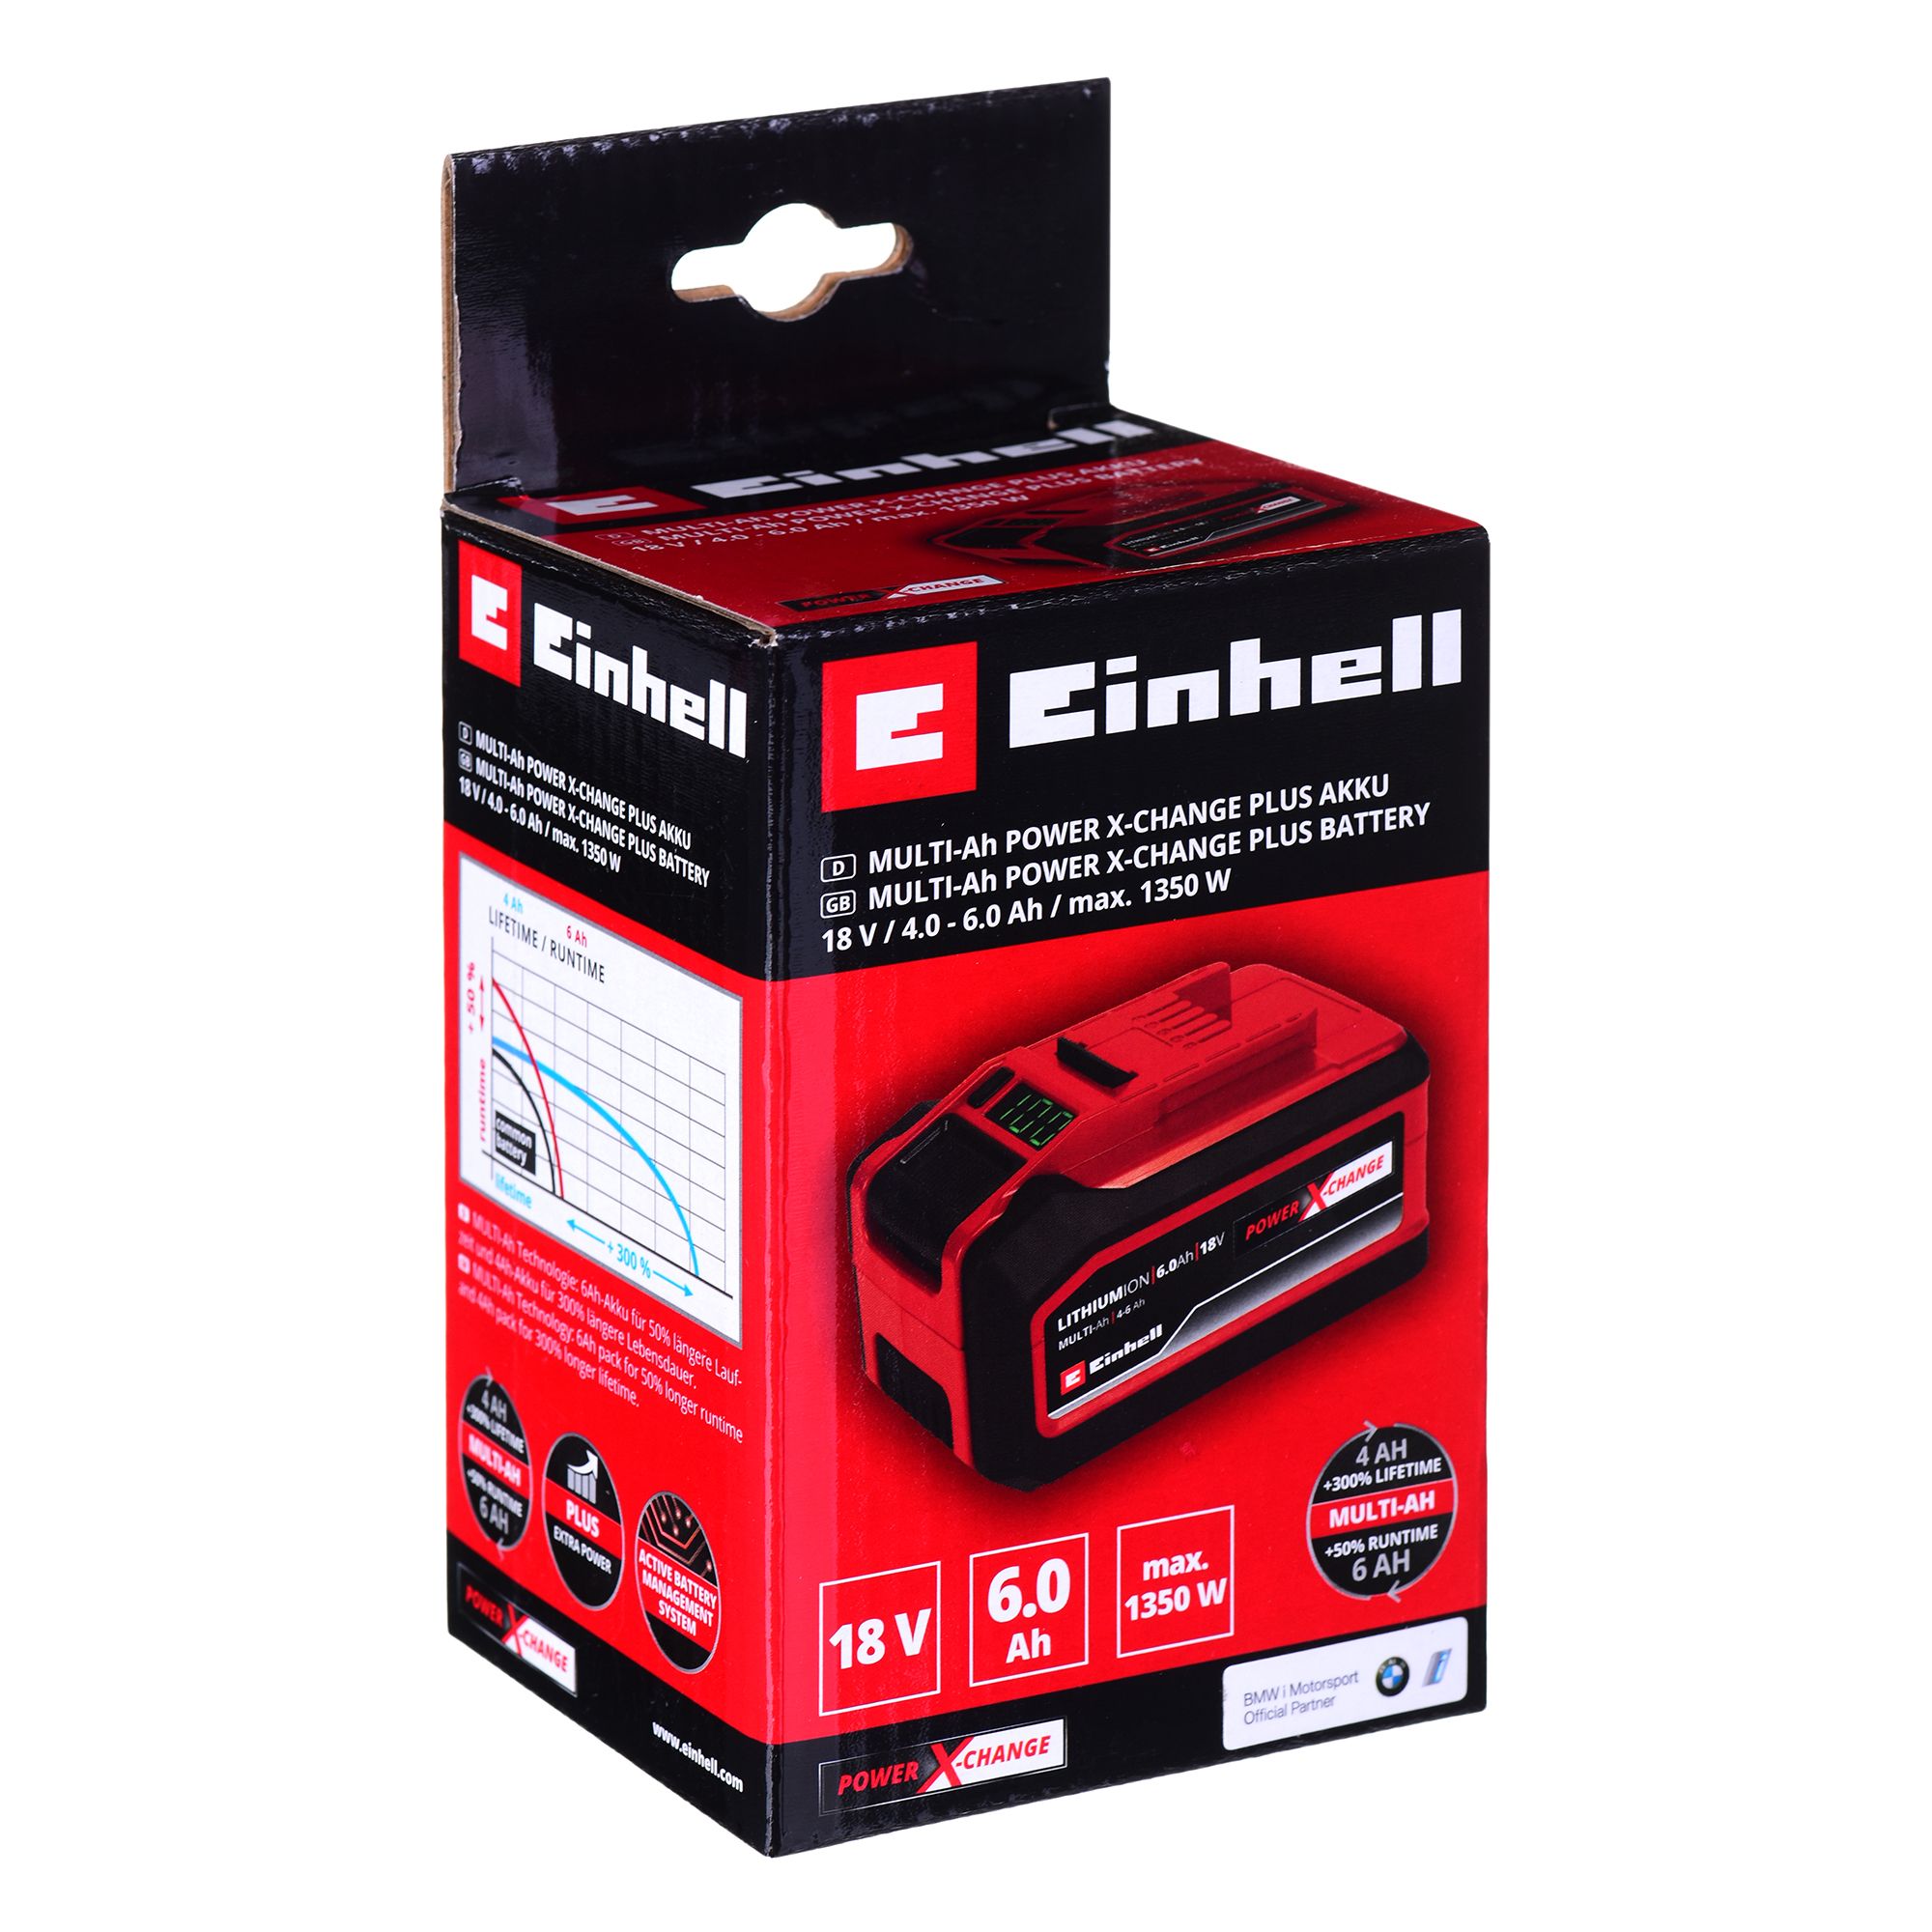 Einhell 4511502 cordless tool battery / charger_4